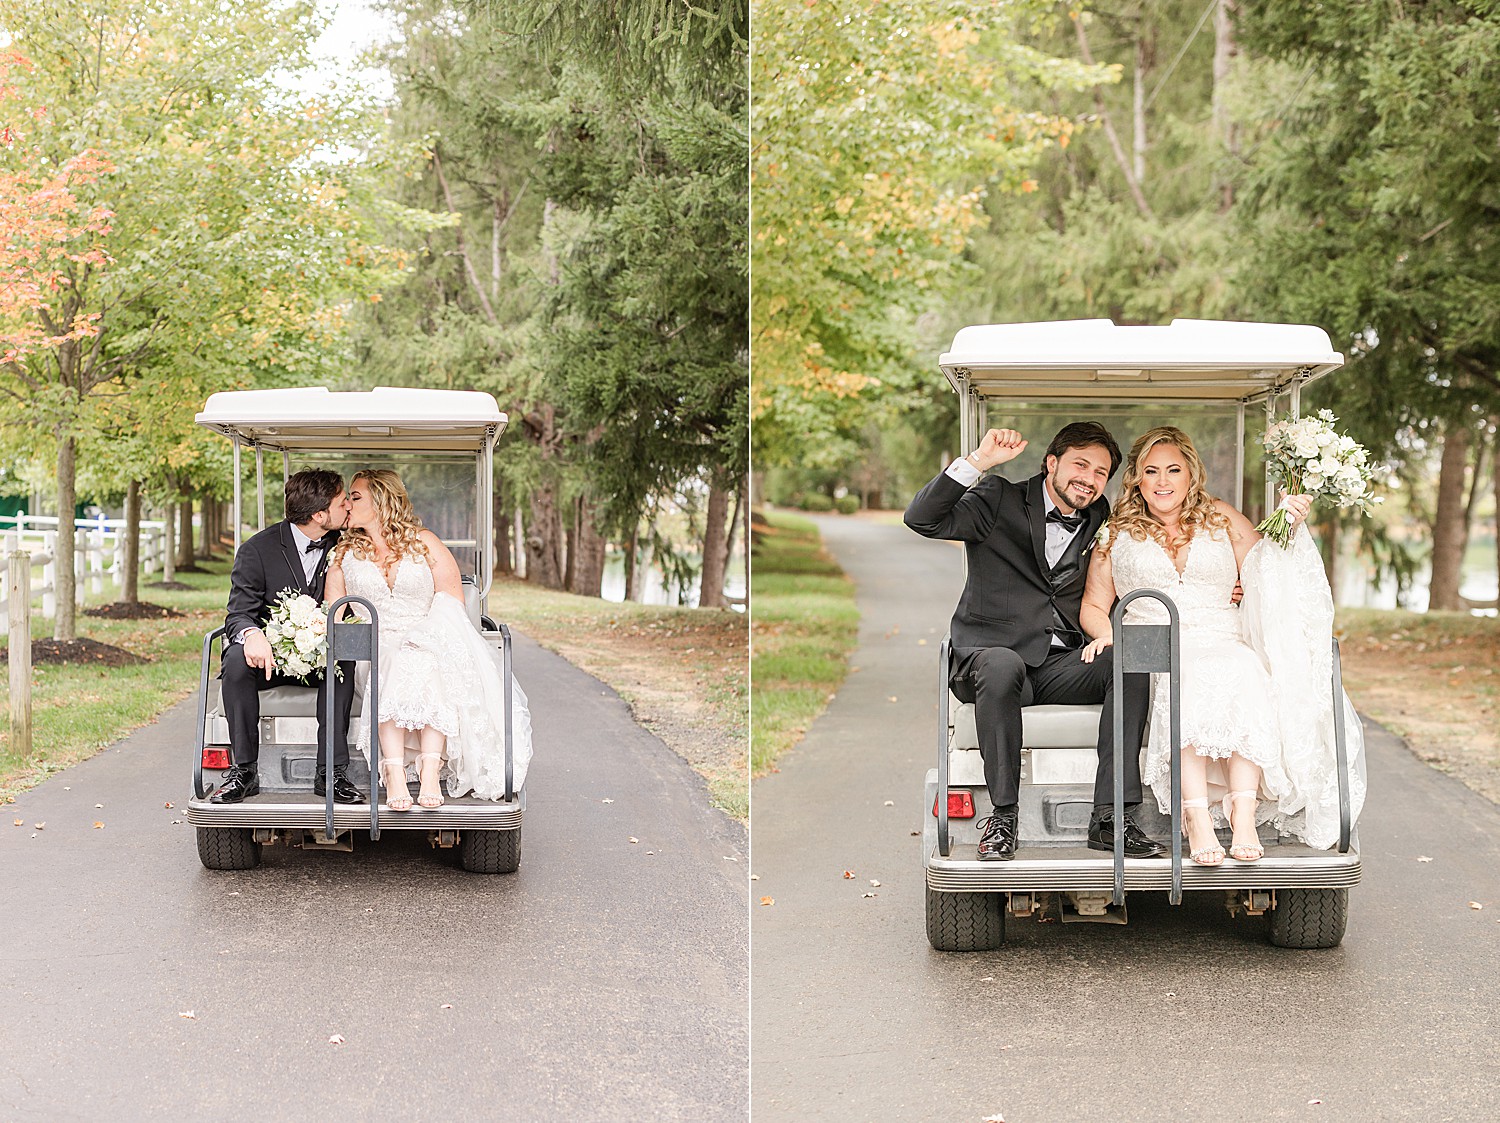 bride and groom ride on golf cart back to the wedding venue building